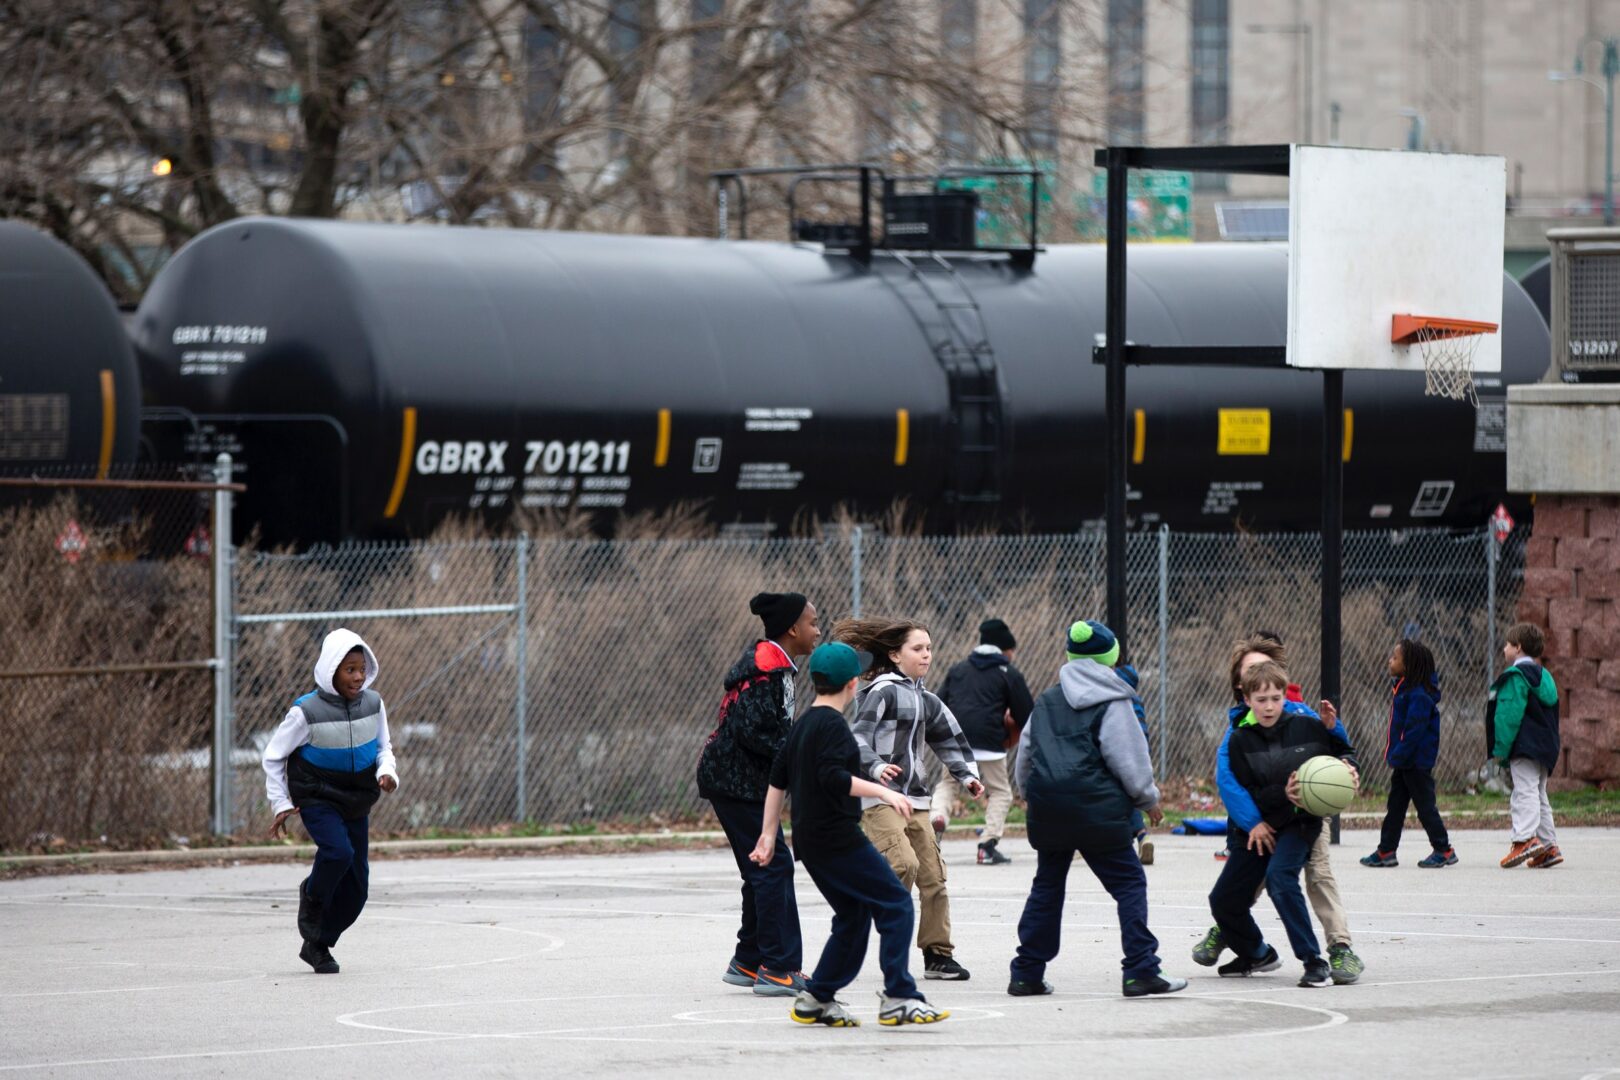 In this photo taken April 9, 2015, children play in view of train tank cars with placards indicating petroleum crude oil standing idle on the tracks, in Philadelphia. Rail tank cars that are used to transport most crude oil and many other flammable liquids will have to be built to stronger standards to reduce the risk of catastrophic train crash and fire under a series of new rules unveiled Friday by U.S. and Canadian transportation officials.